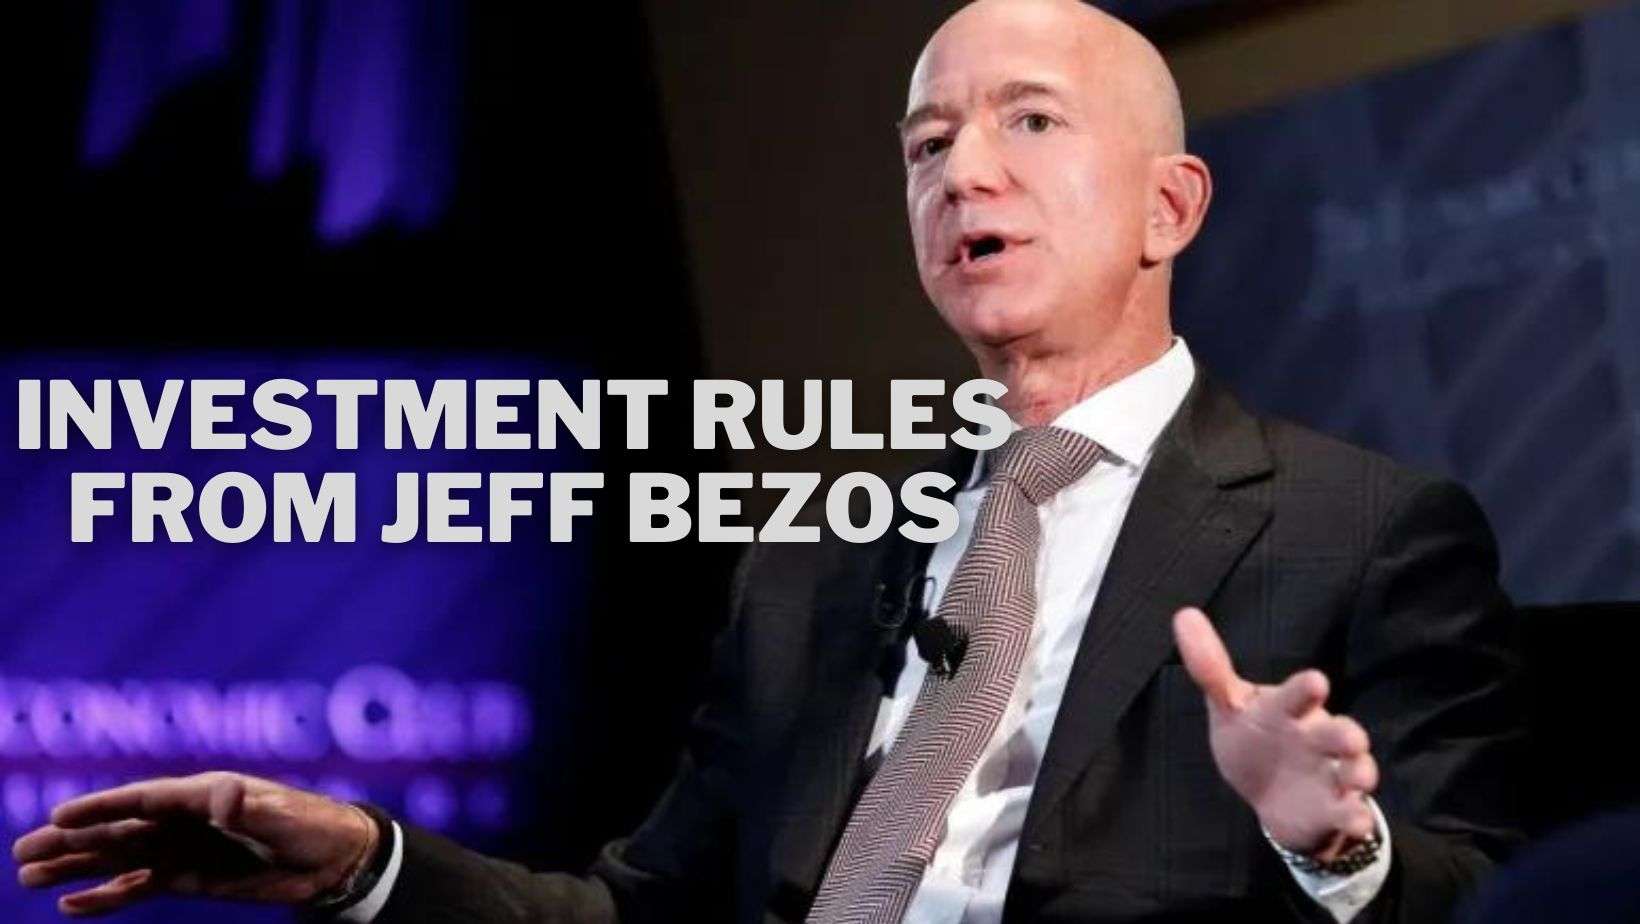 5 Important Investment Rules From Jeff Bezos For Investors